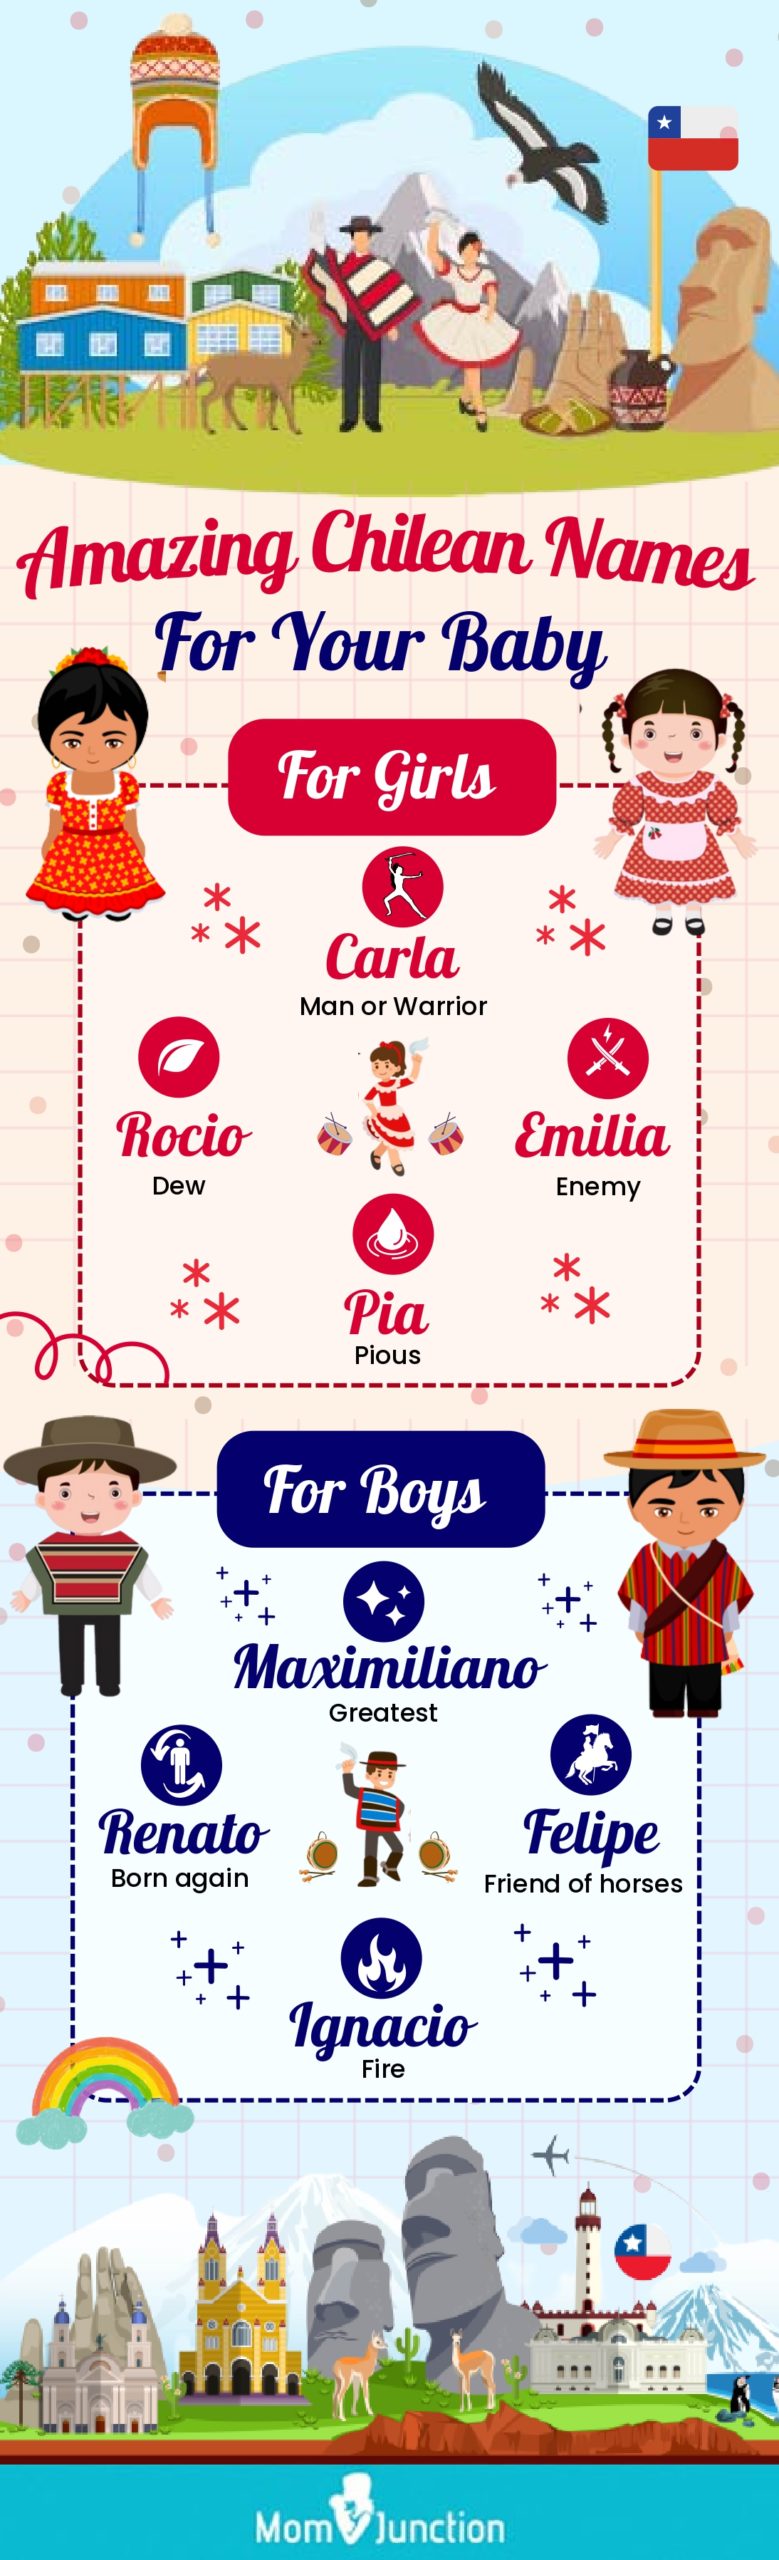 amazing chilean names for your baby (infographic)